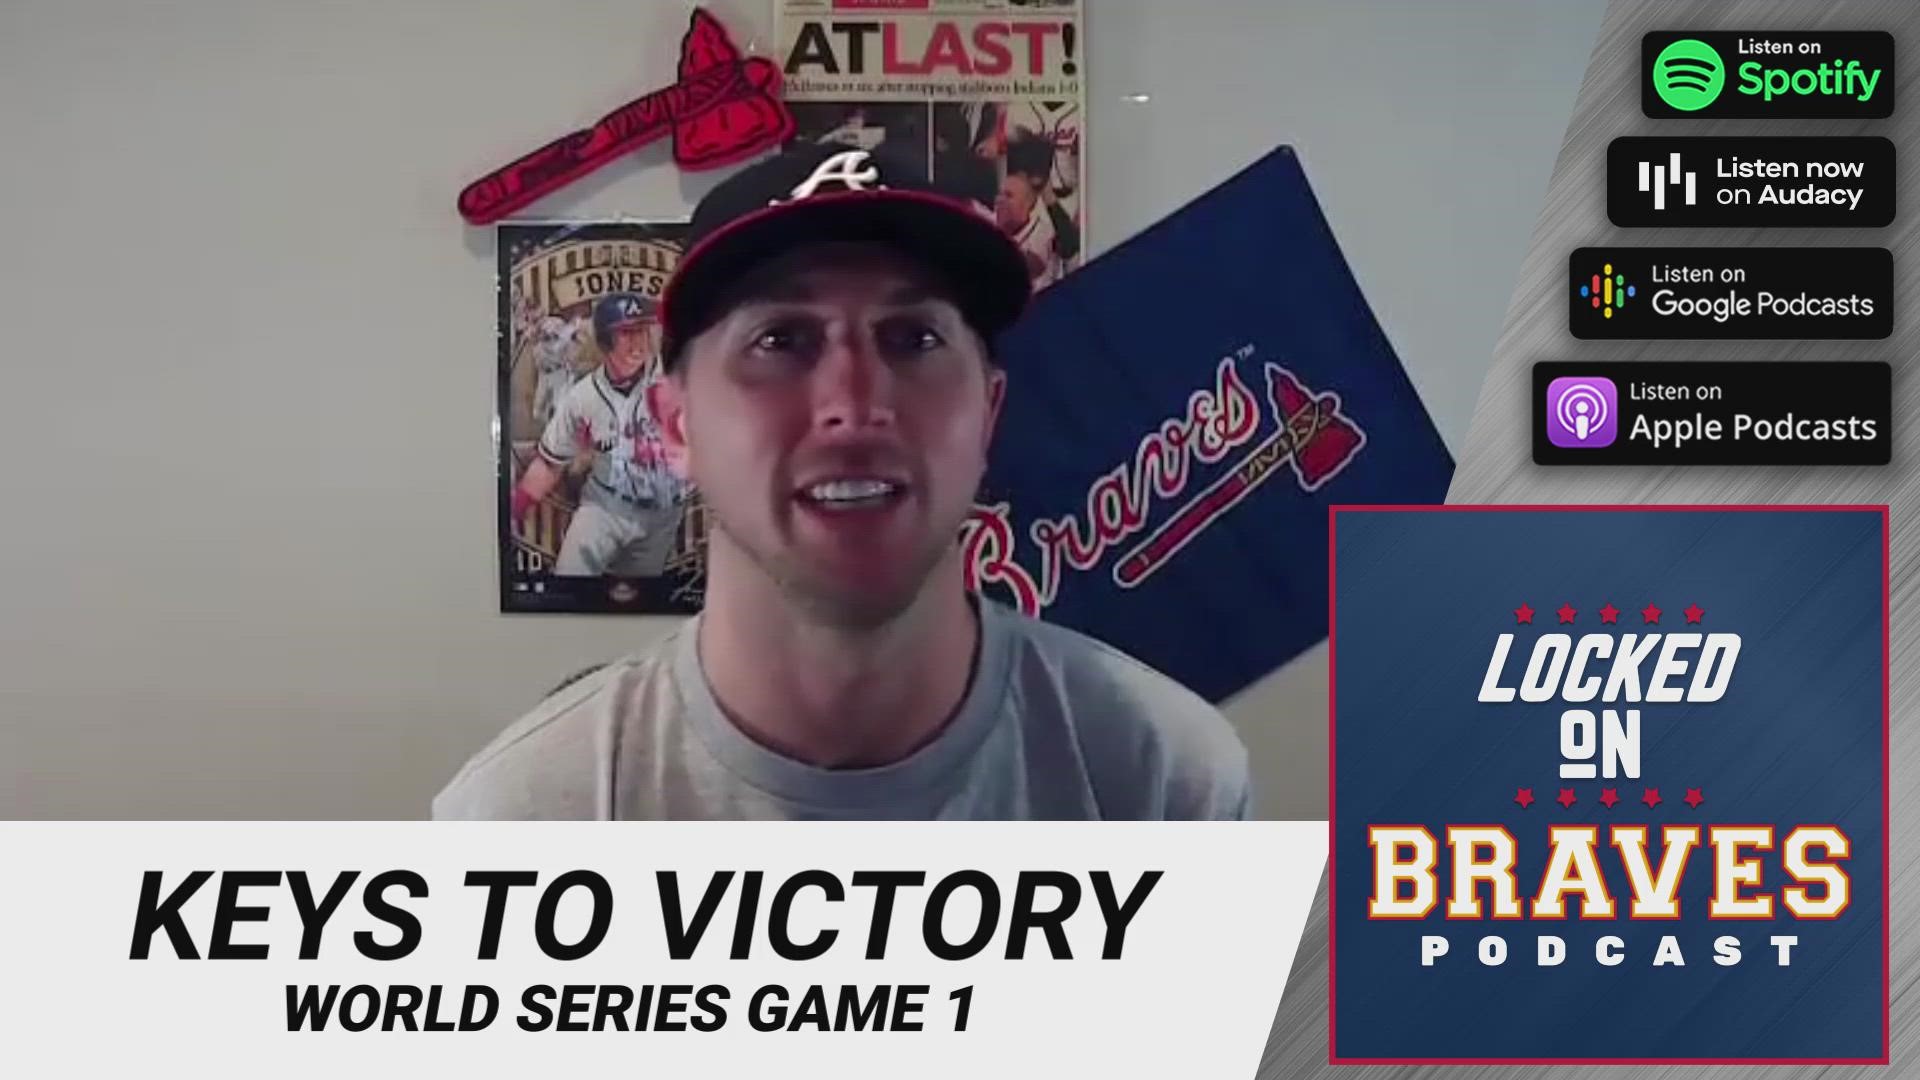 The Braves are back in the World Series for the first time since 1999. Here are the keys to beating the Astros.